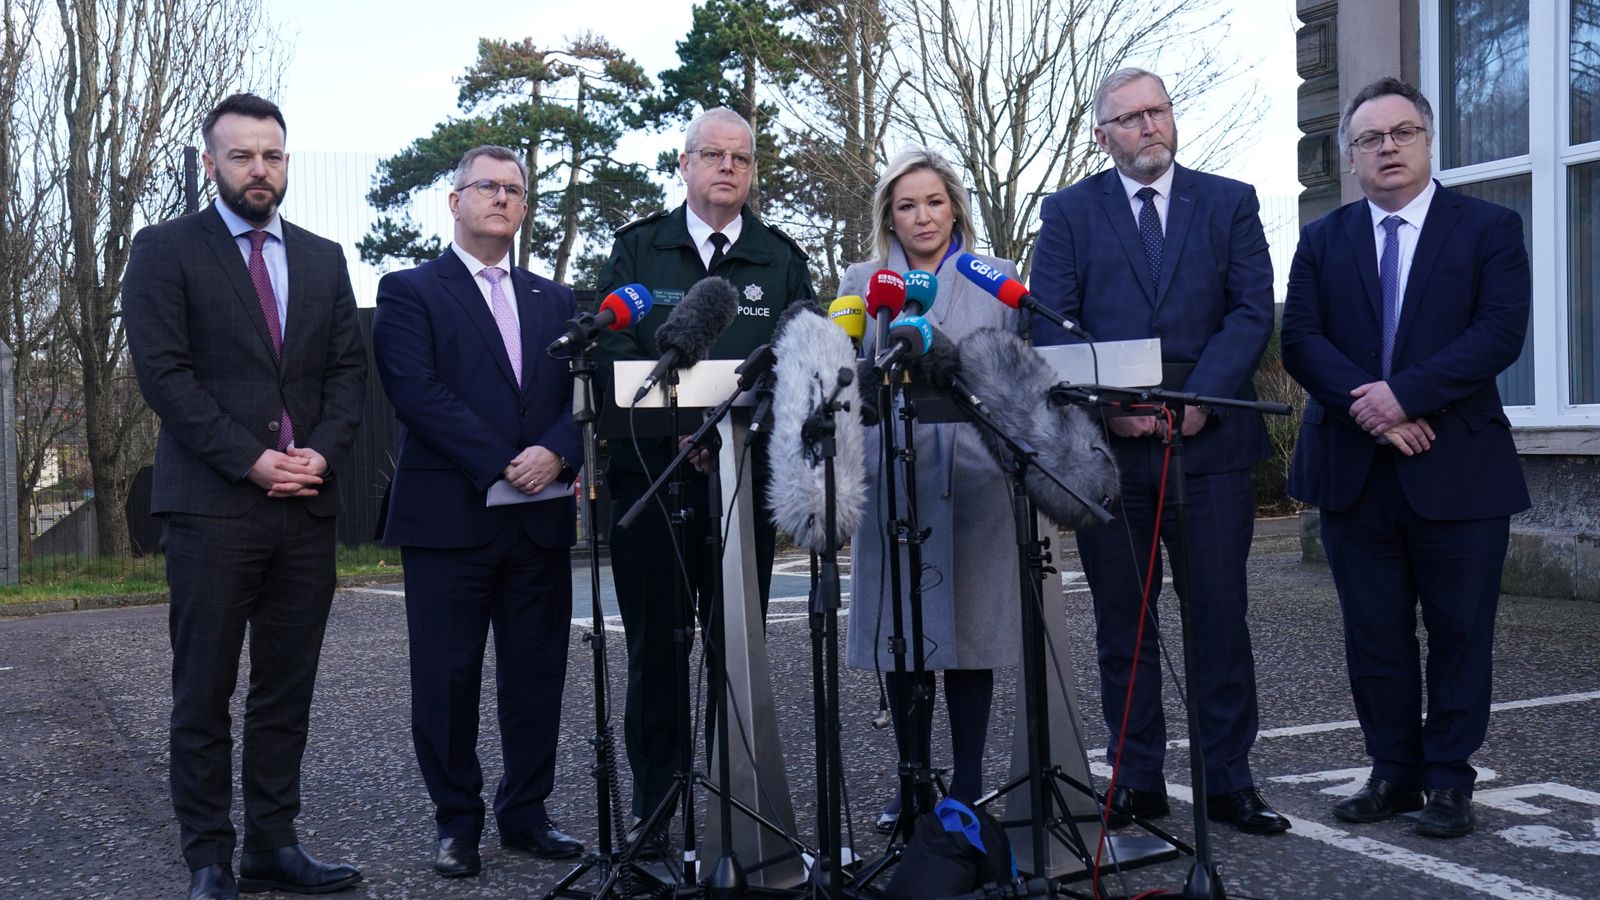 Omagh police shooting: Sinn Fein's Michelle O'Neill says 'we stand united in condemnation' of attack on senior officer